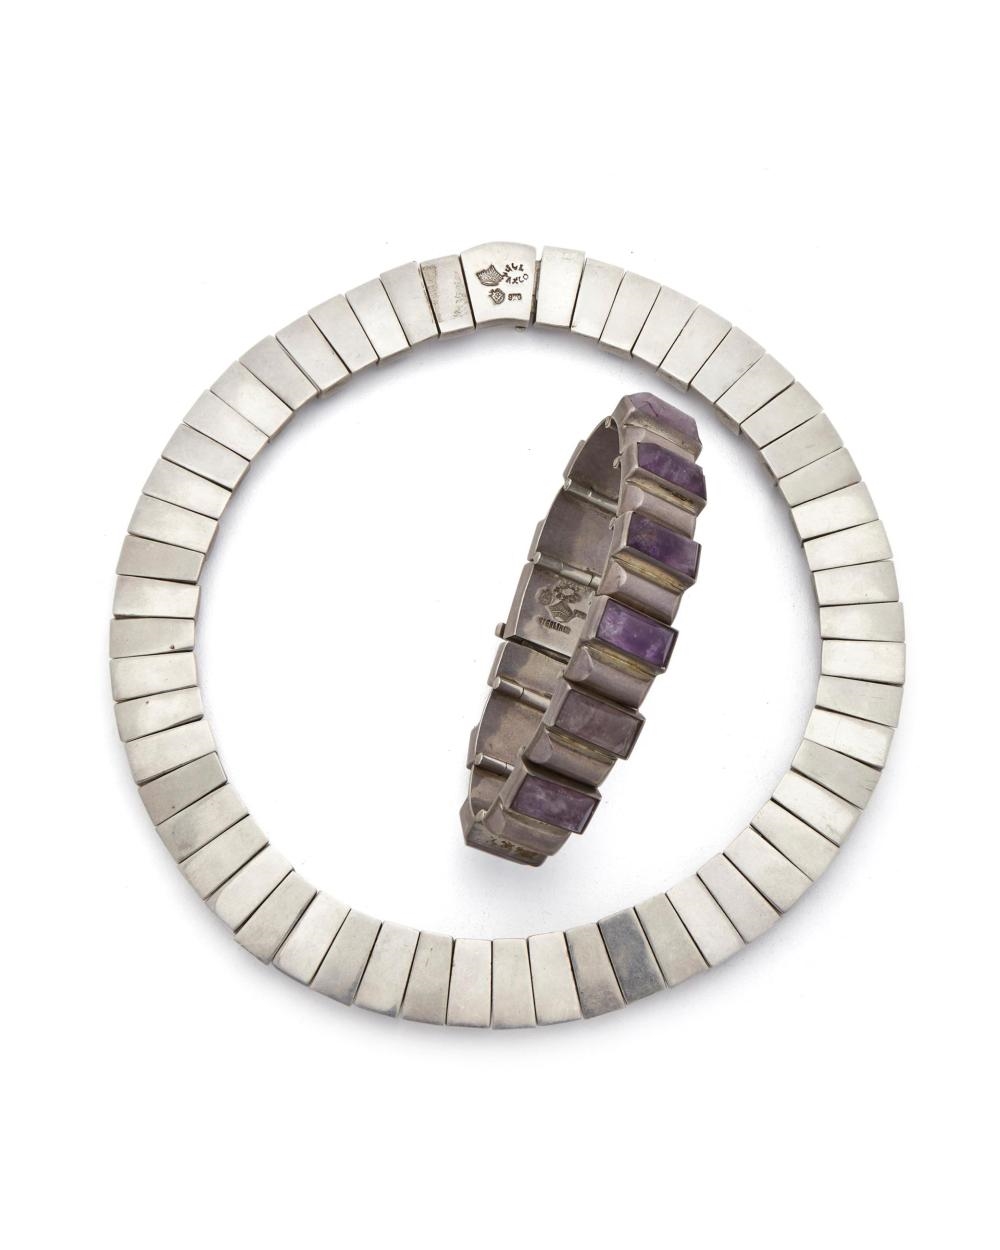 Artwork by Antonio Pineda, A set of sterling silver and amethyst jewelry, Made of silver